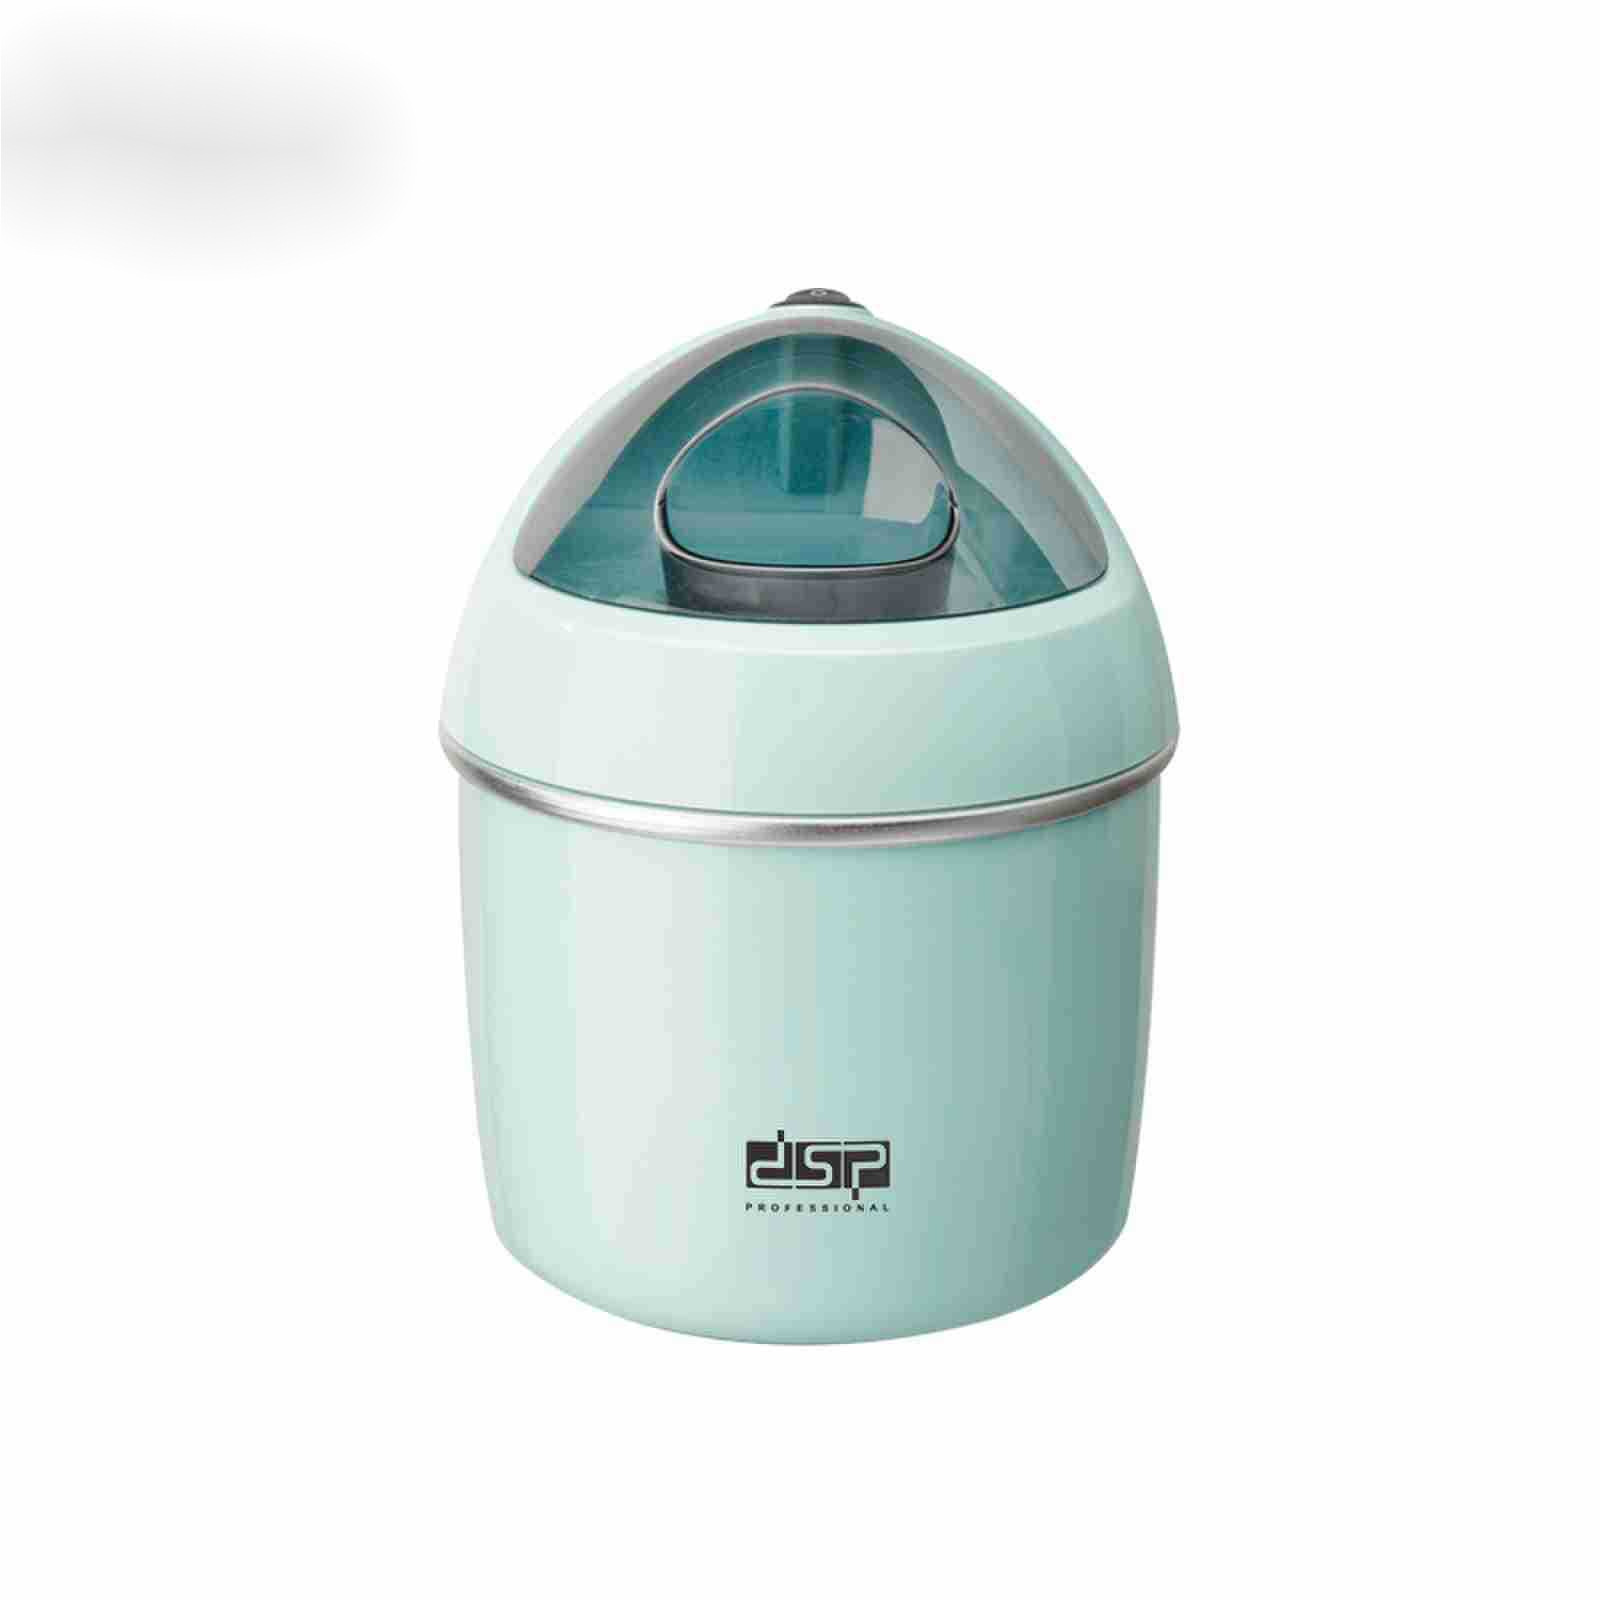 Electric Ice Cream Maker with Topping Bin